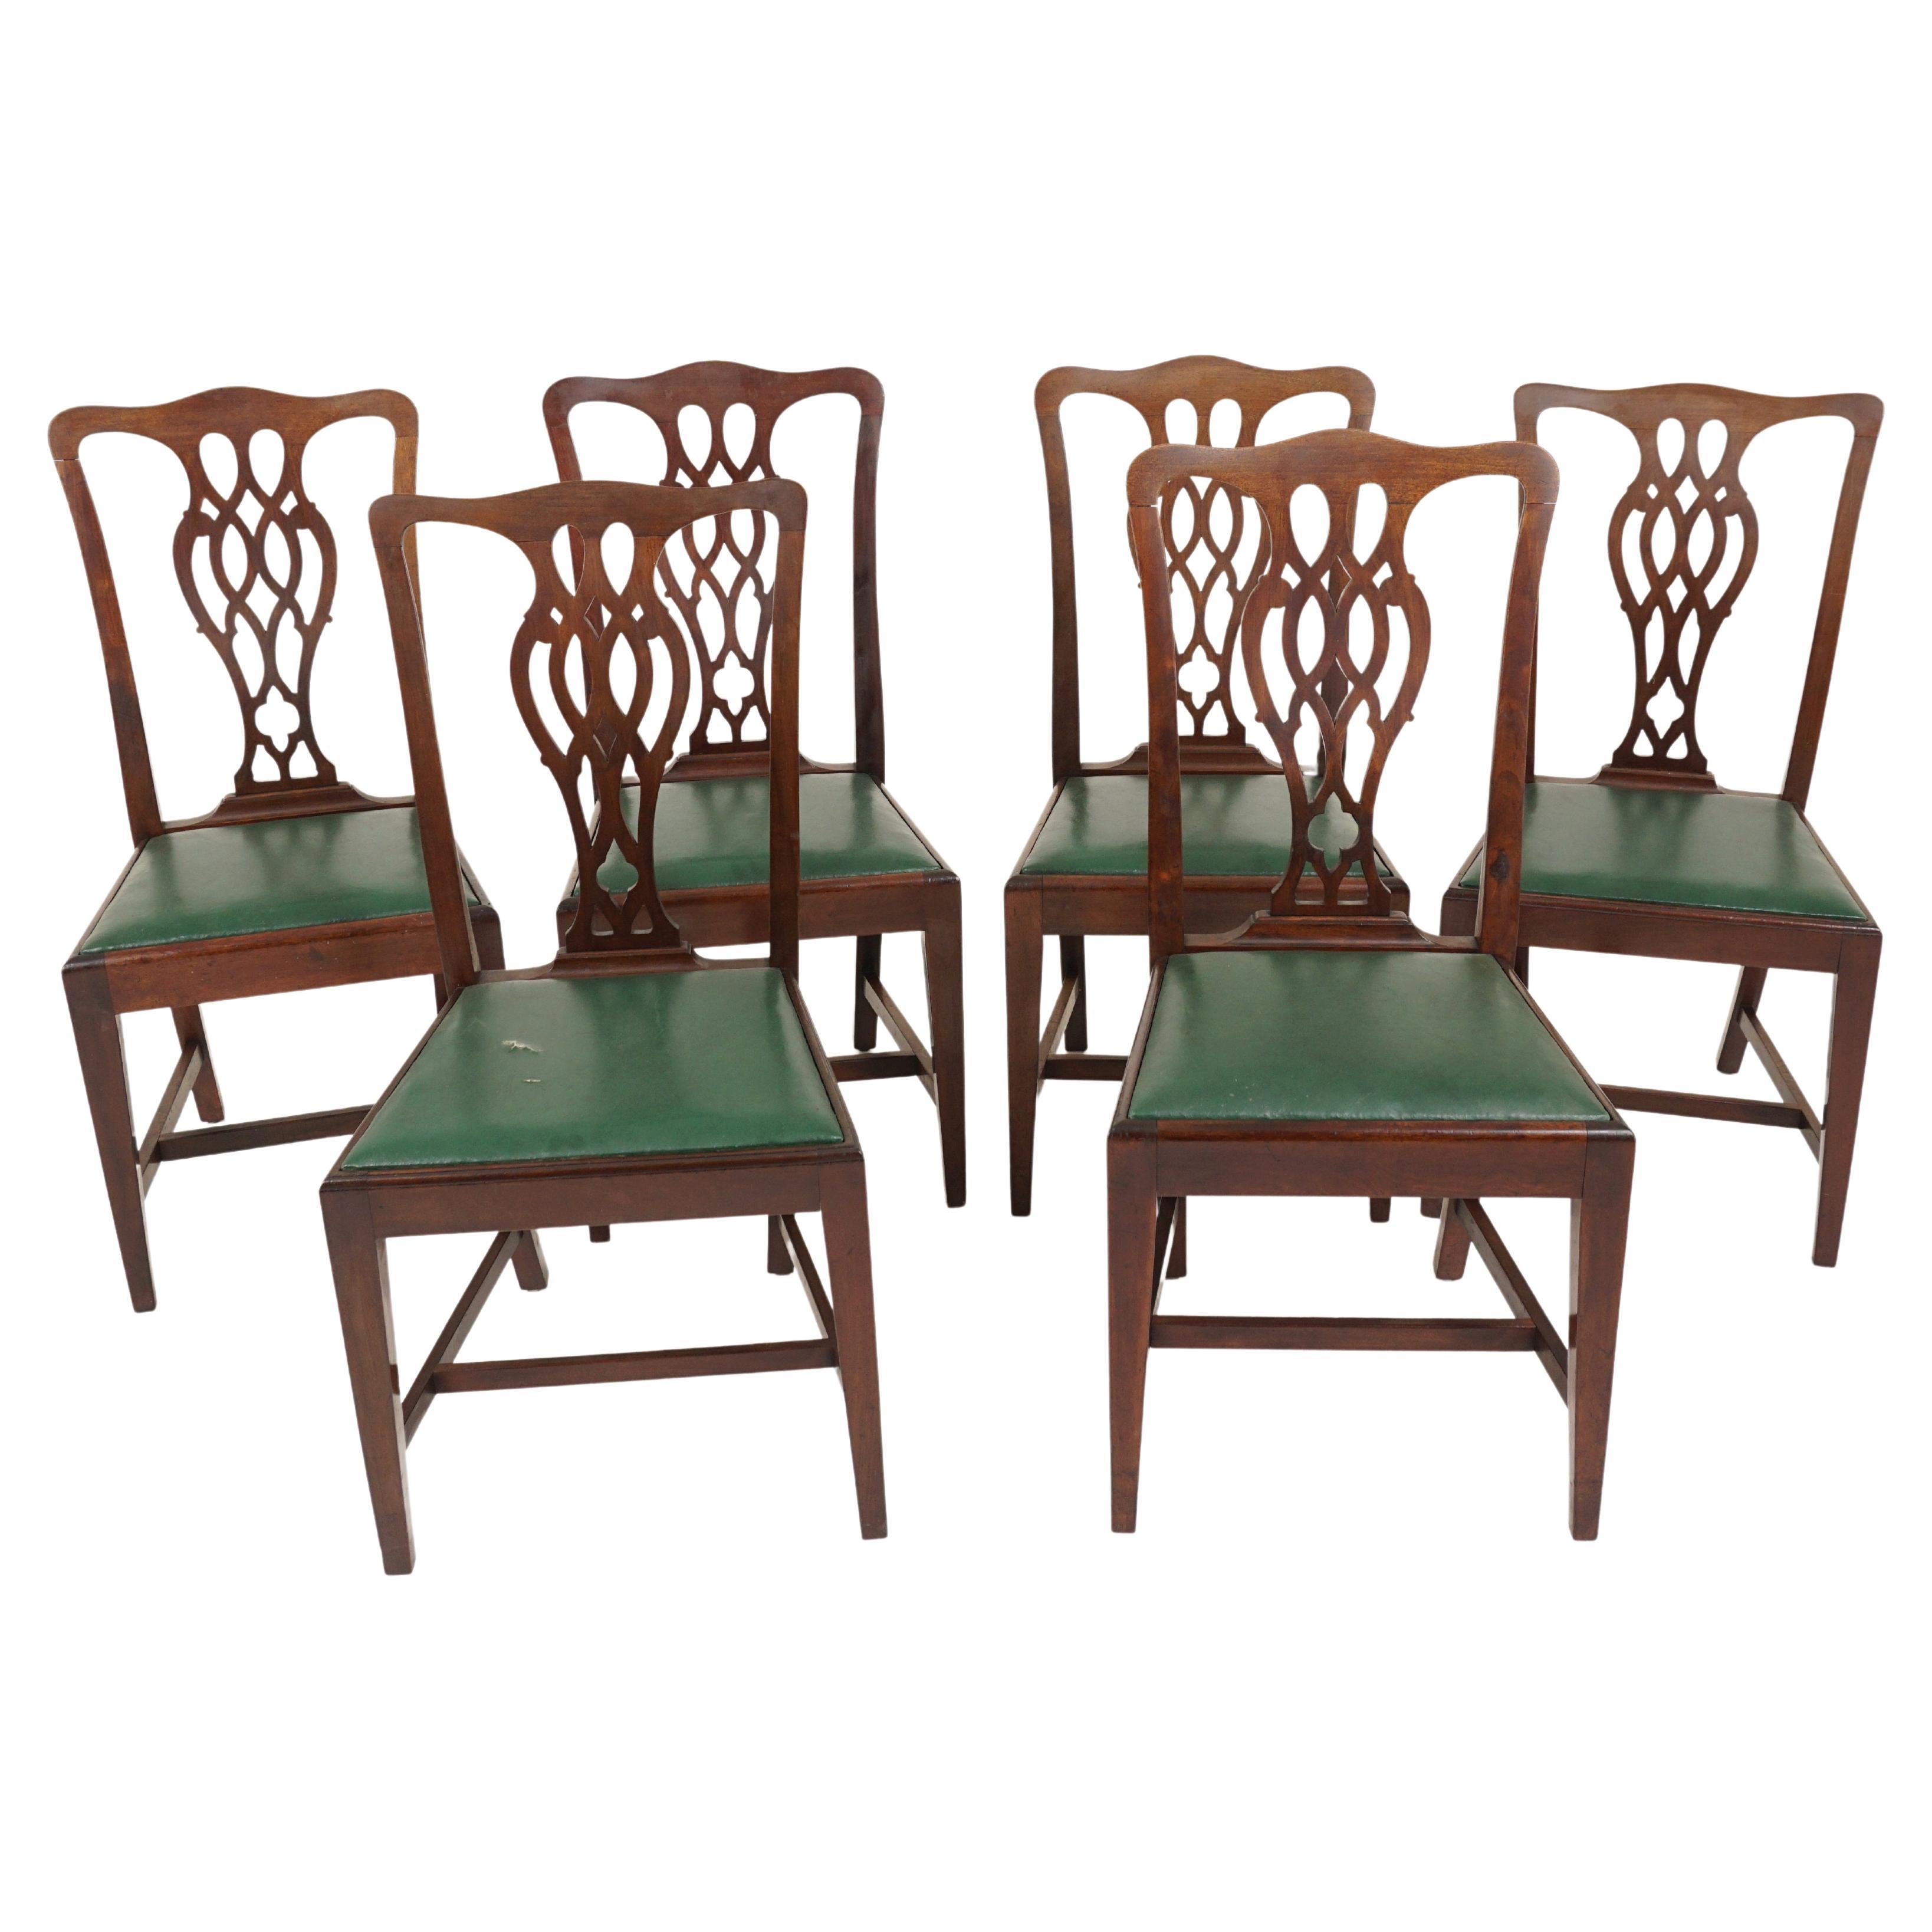 Vintage Dining Chairs, Set of 6, Walnut, Chippendale Style, Scotland 1920, H142